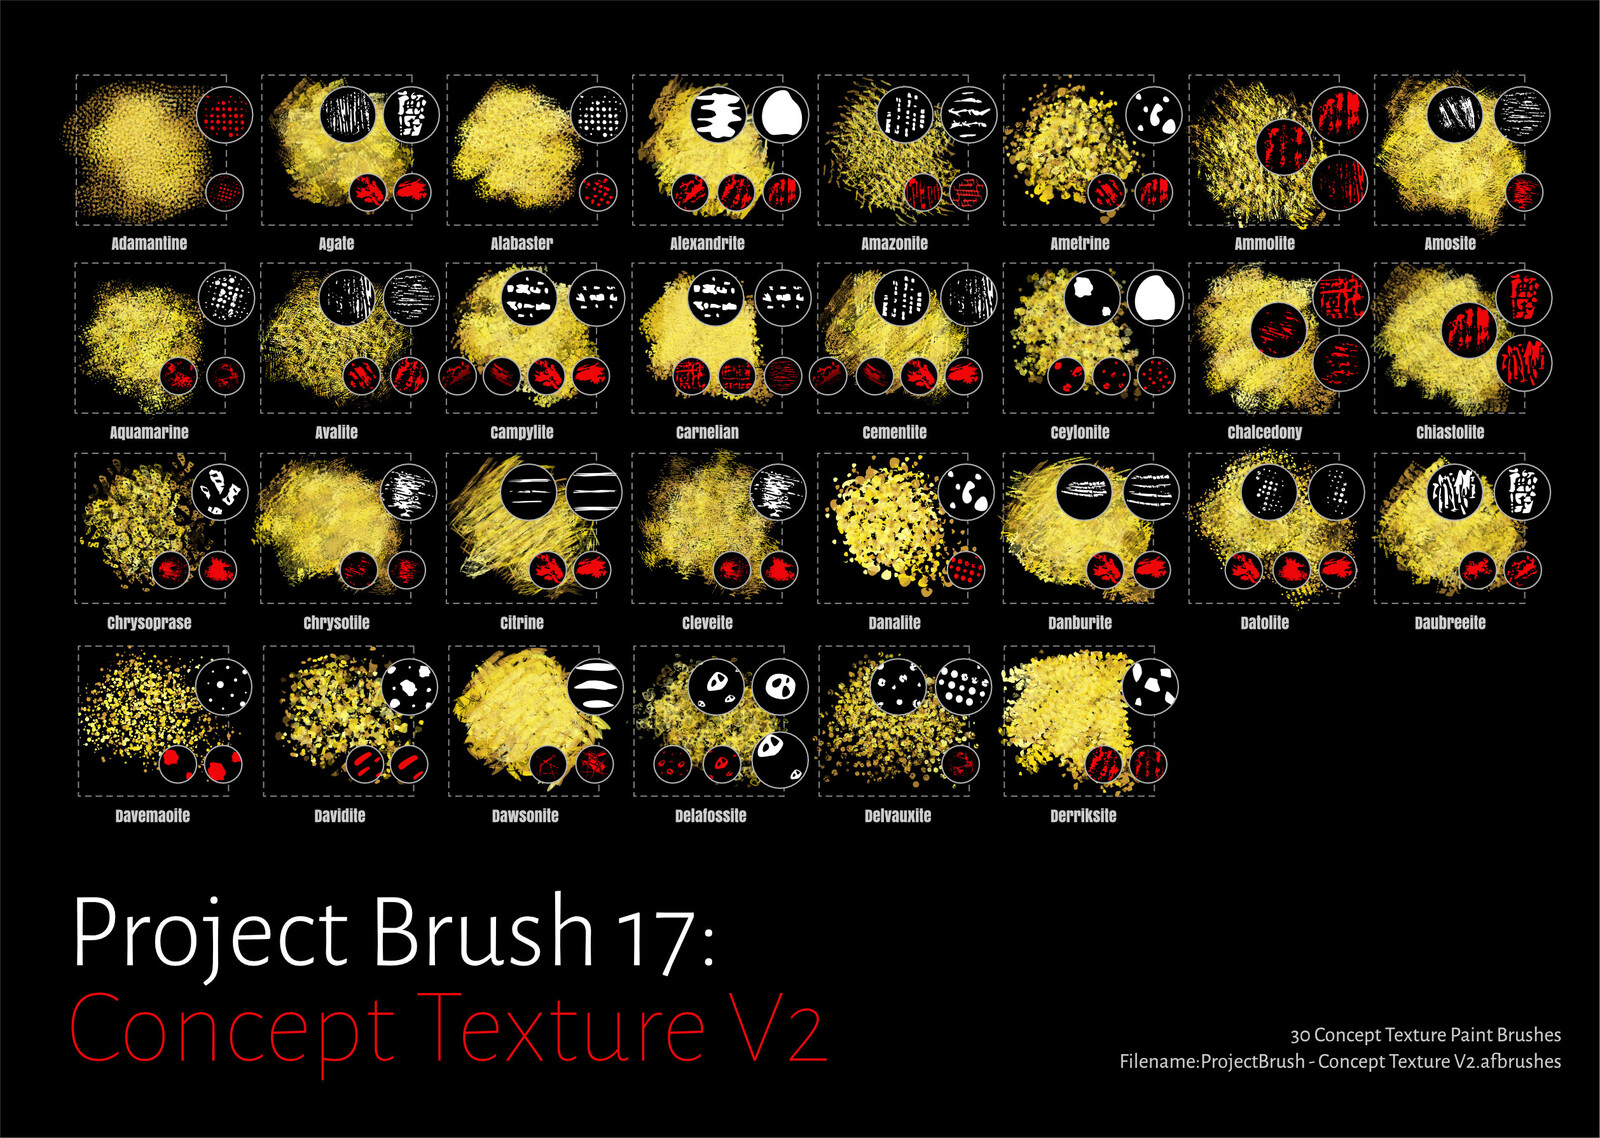 Project Brush: Concept
Texture